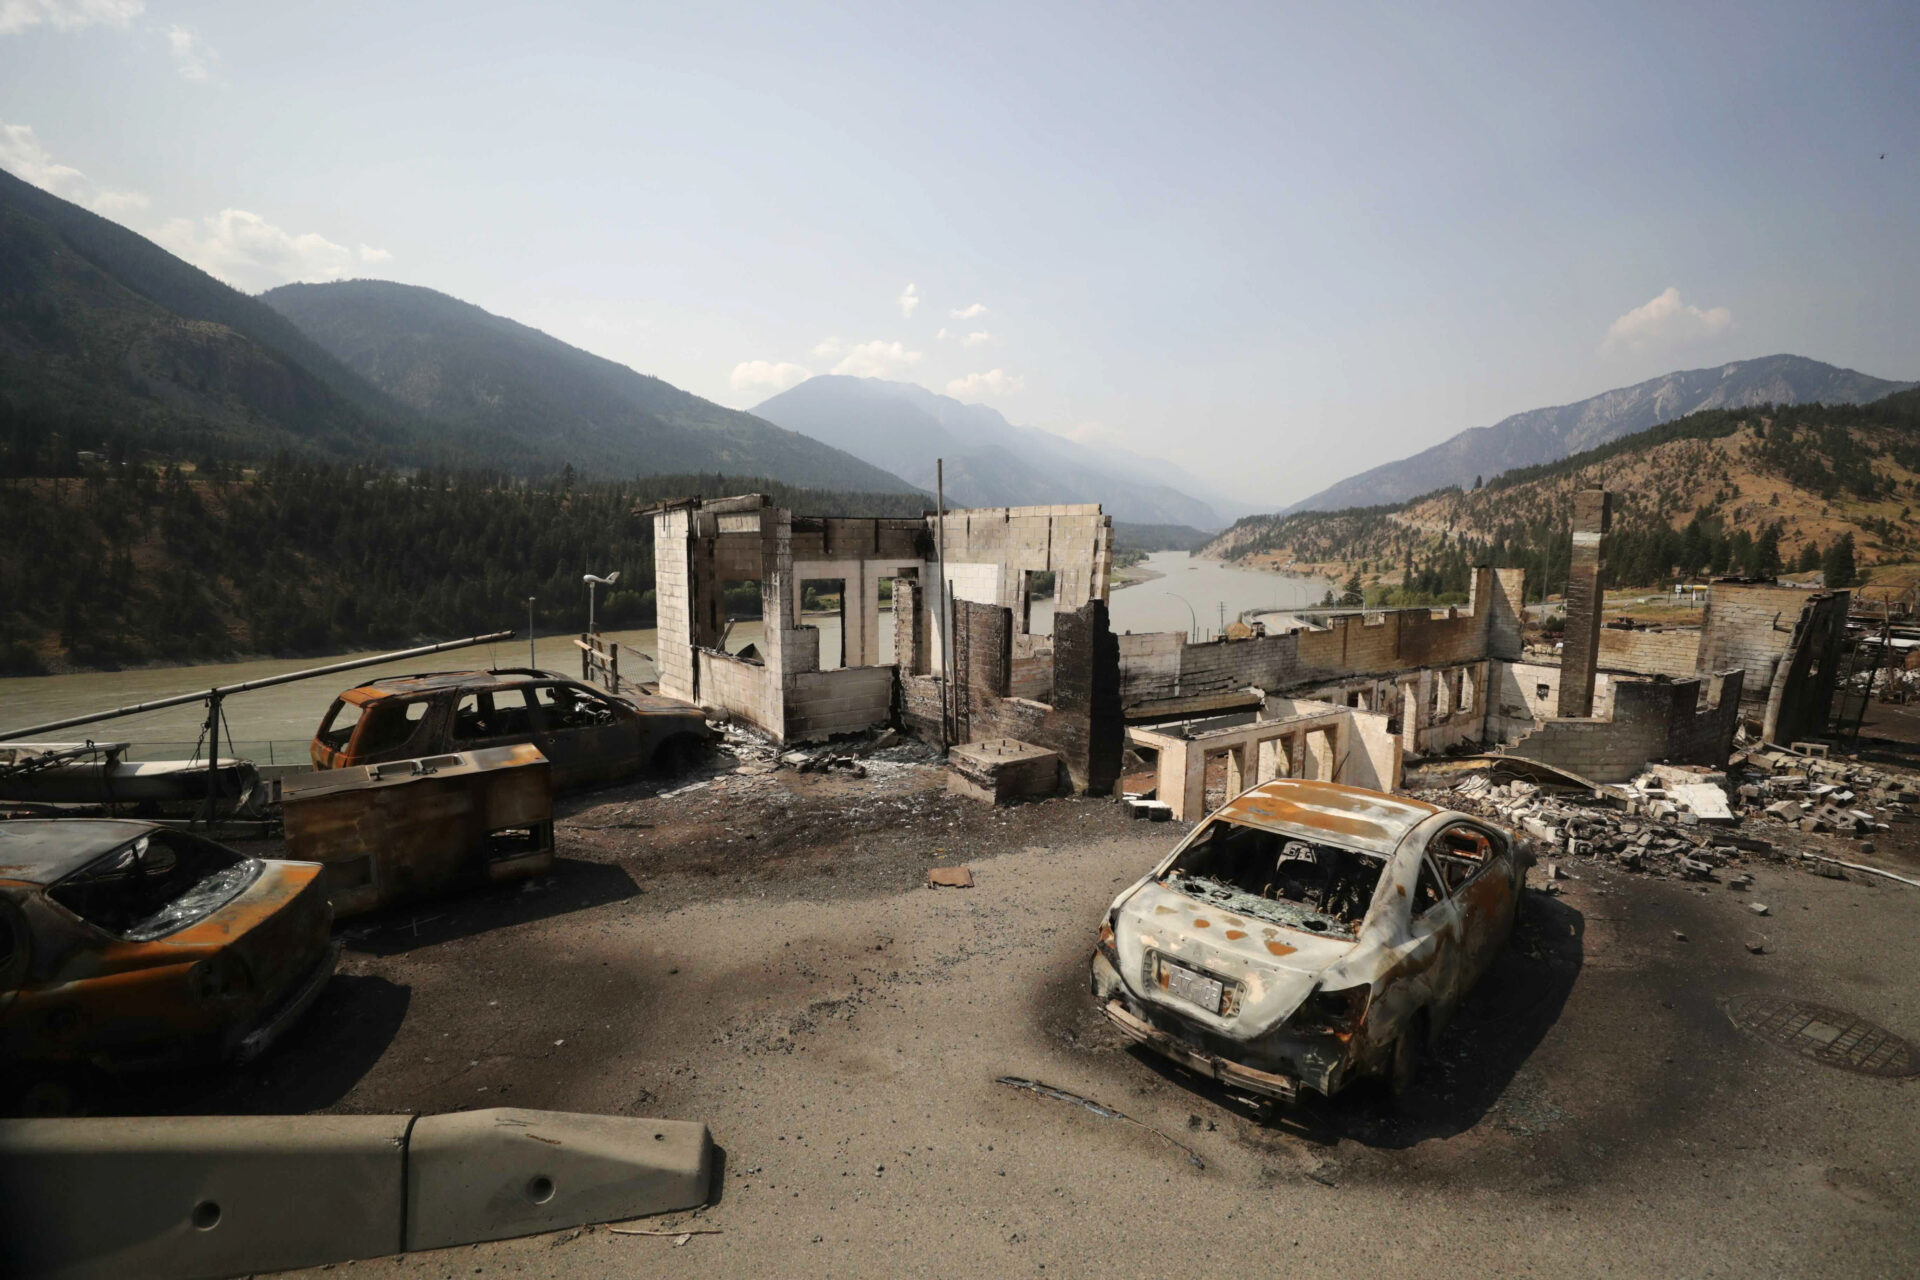 Three burned-out cars sit among the remains of homes in a community along the shores of a river, with mountains on the other side and in the distance. Only the foundations and concrete walls of the homes remain.